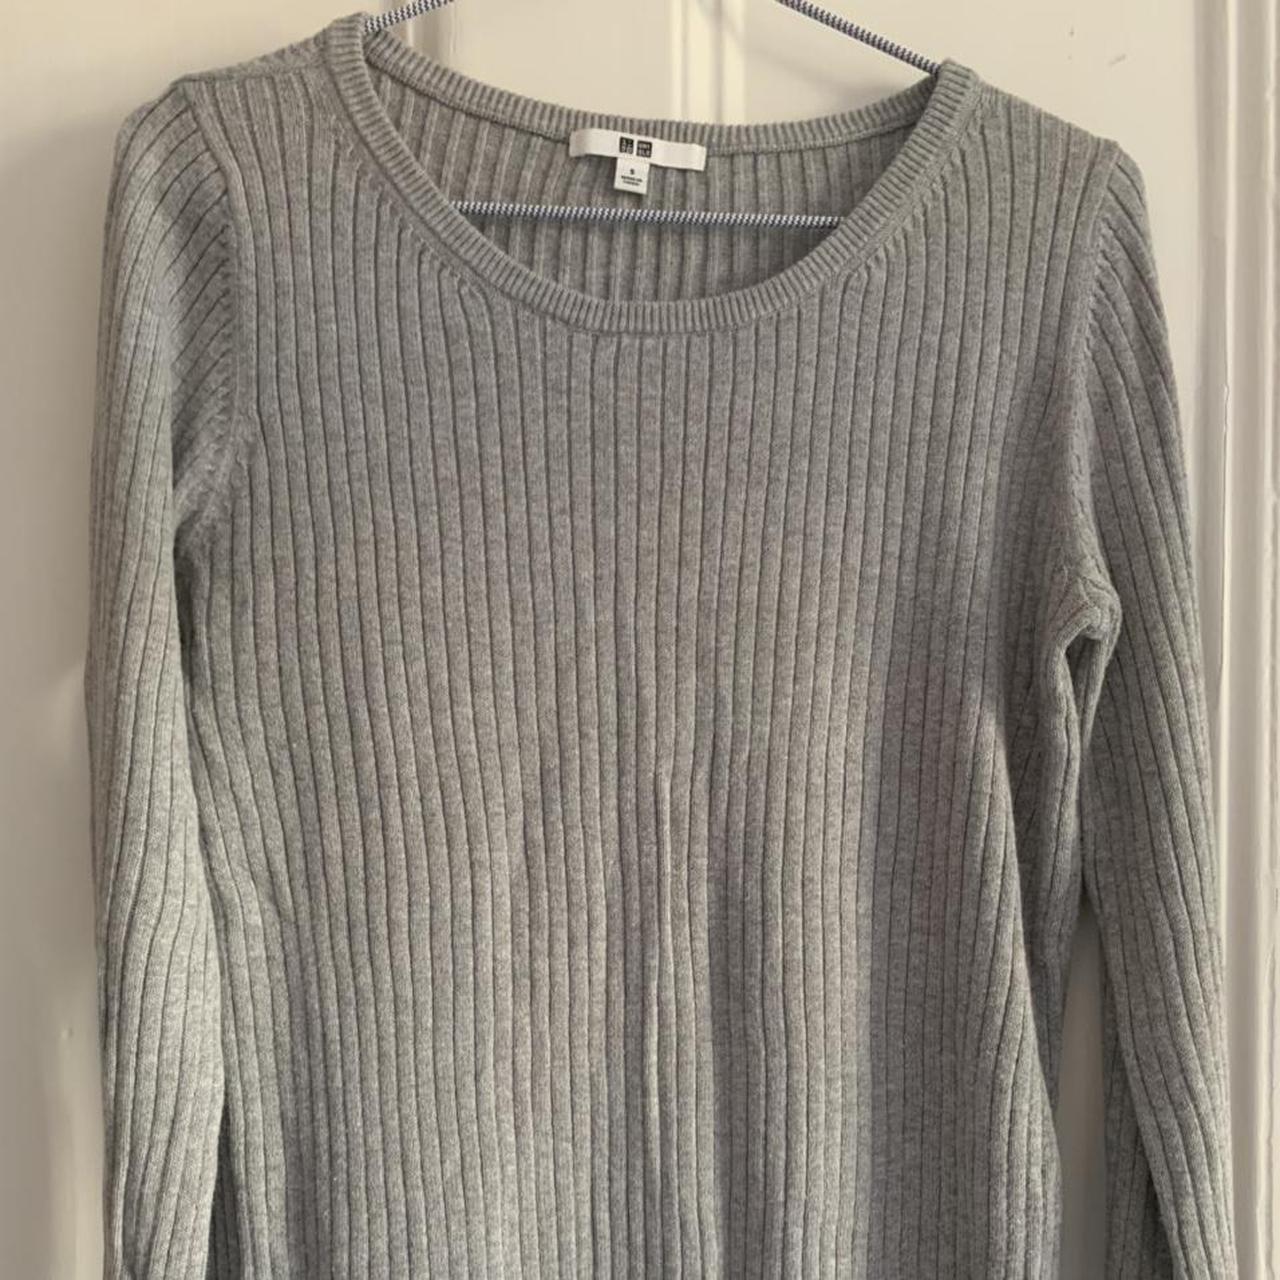 Classic grey sweater. Normal fit. Mix of cotton and... - Depop